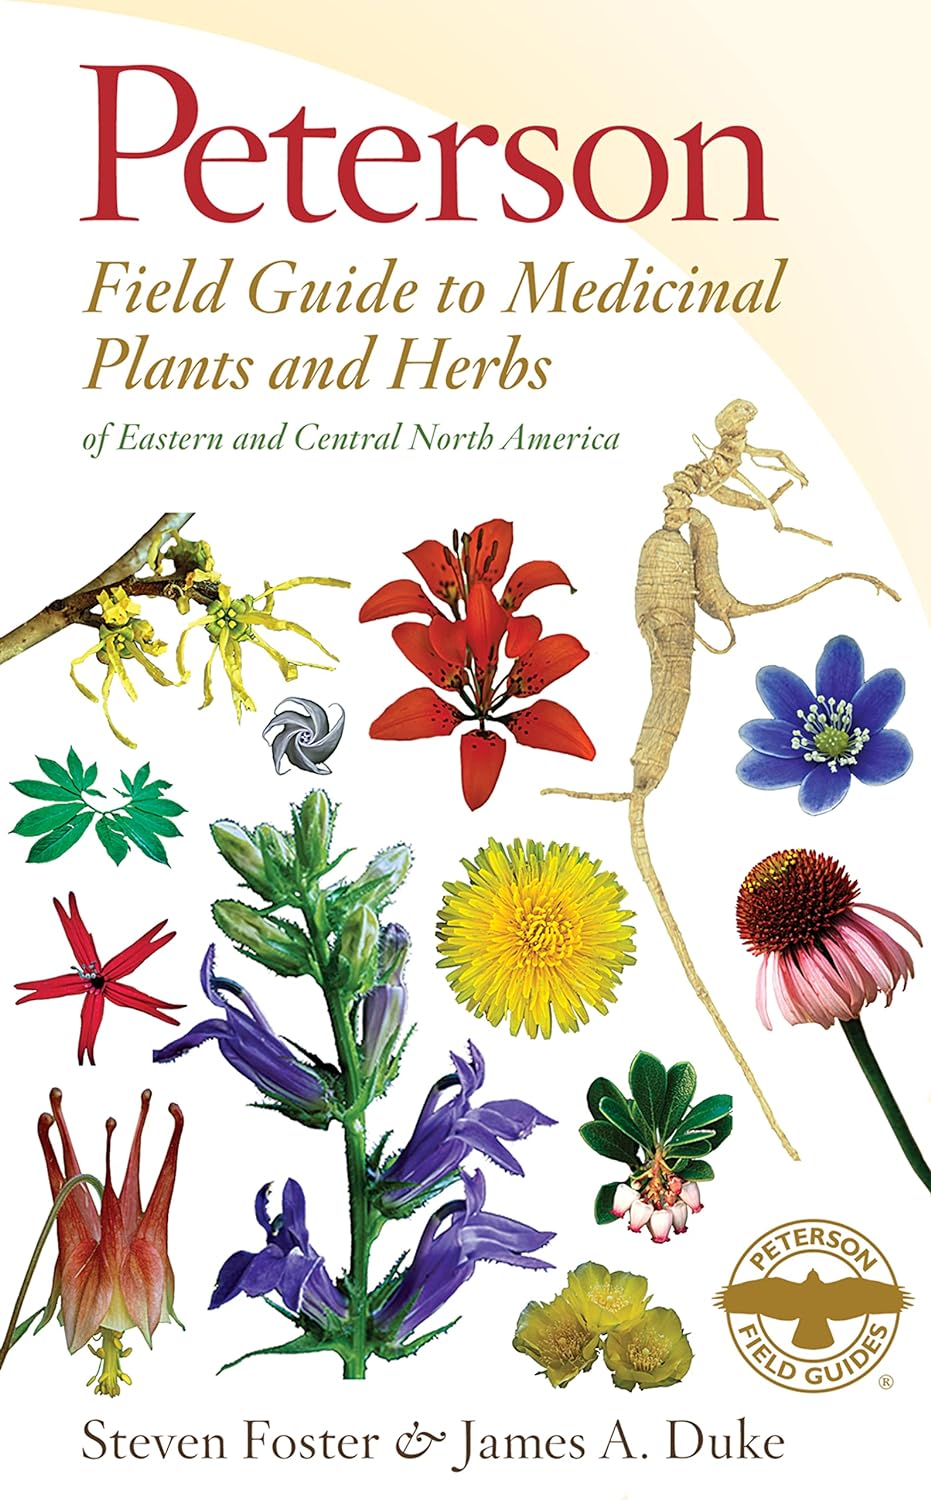 PETERSON - FIELD GUIDE TO MEDICINAL PLANTS AND HERBS